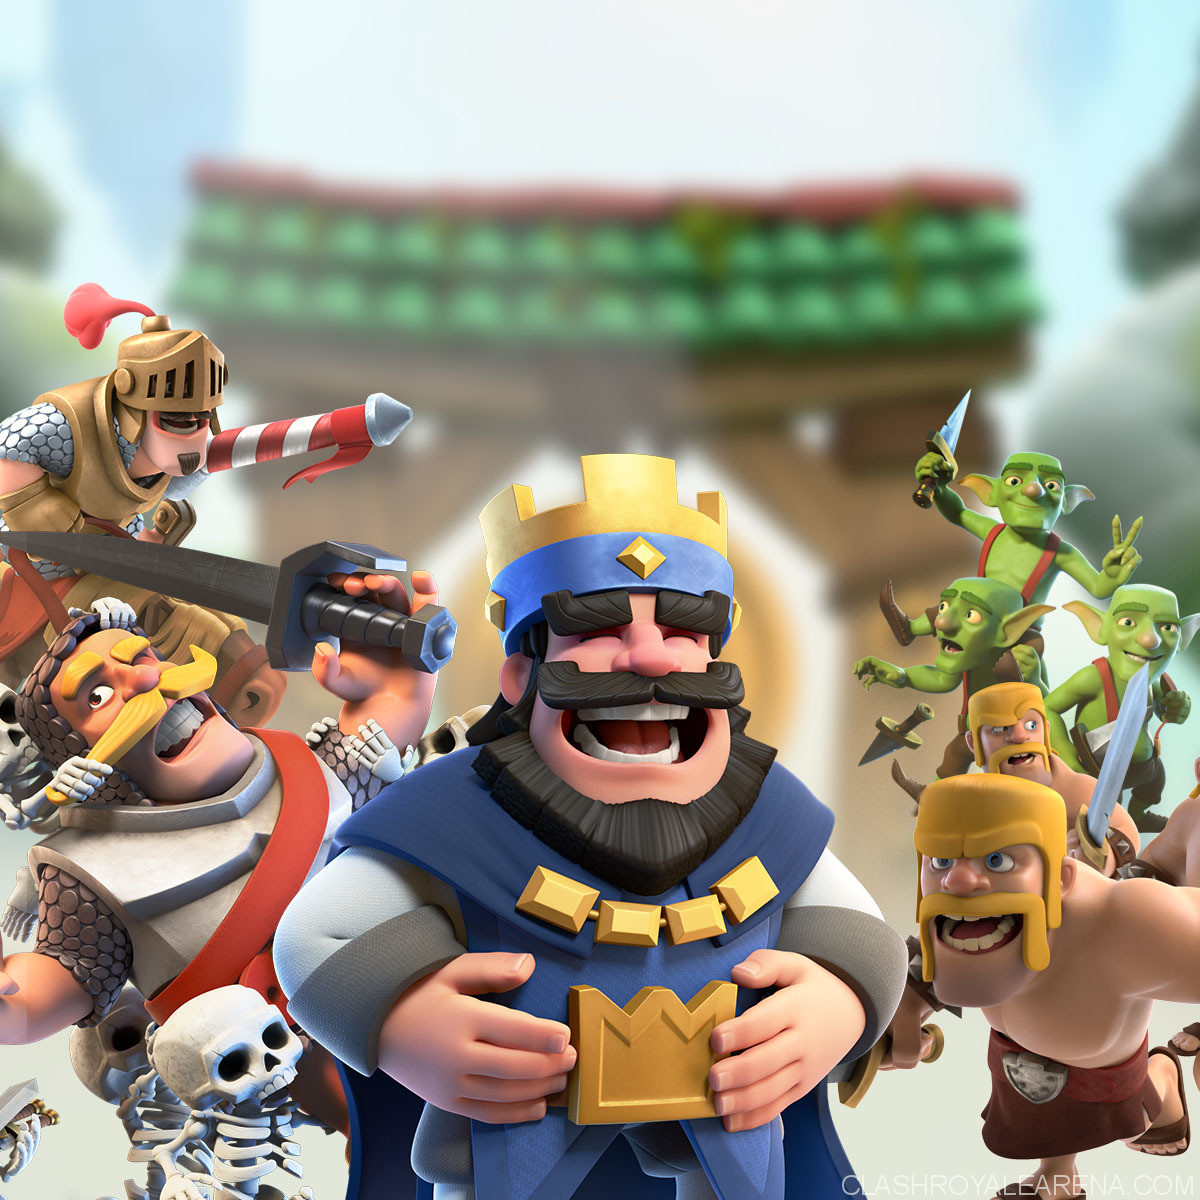 Clans of royale